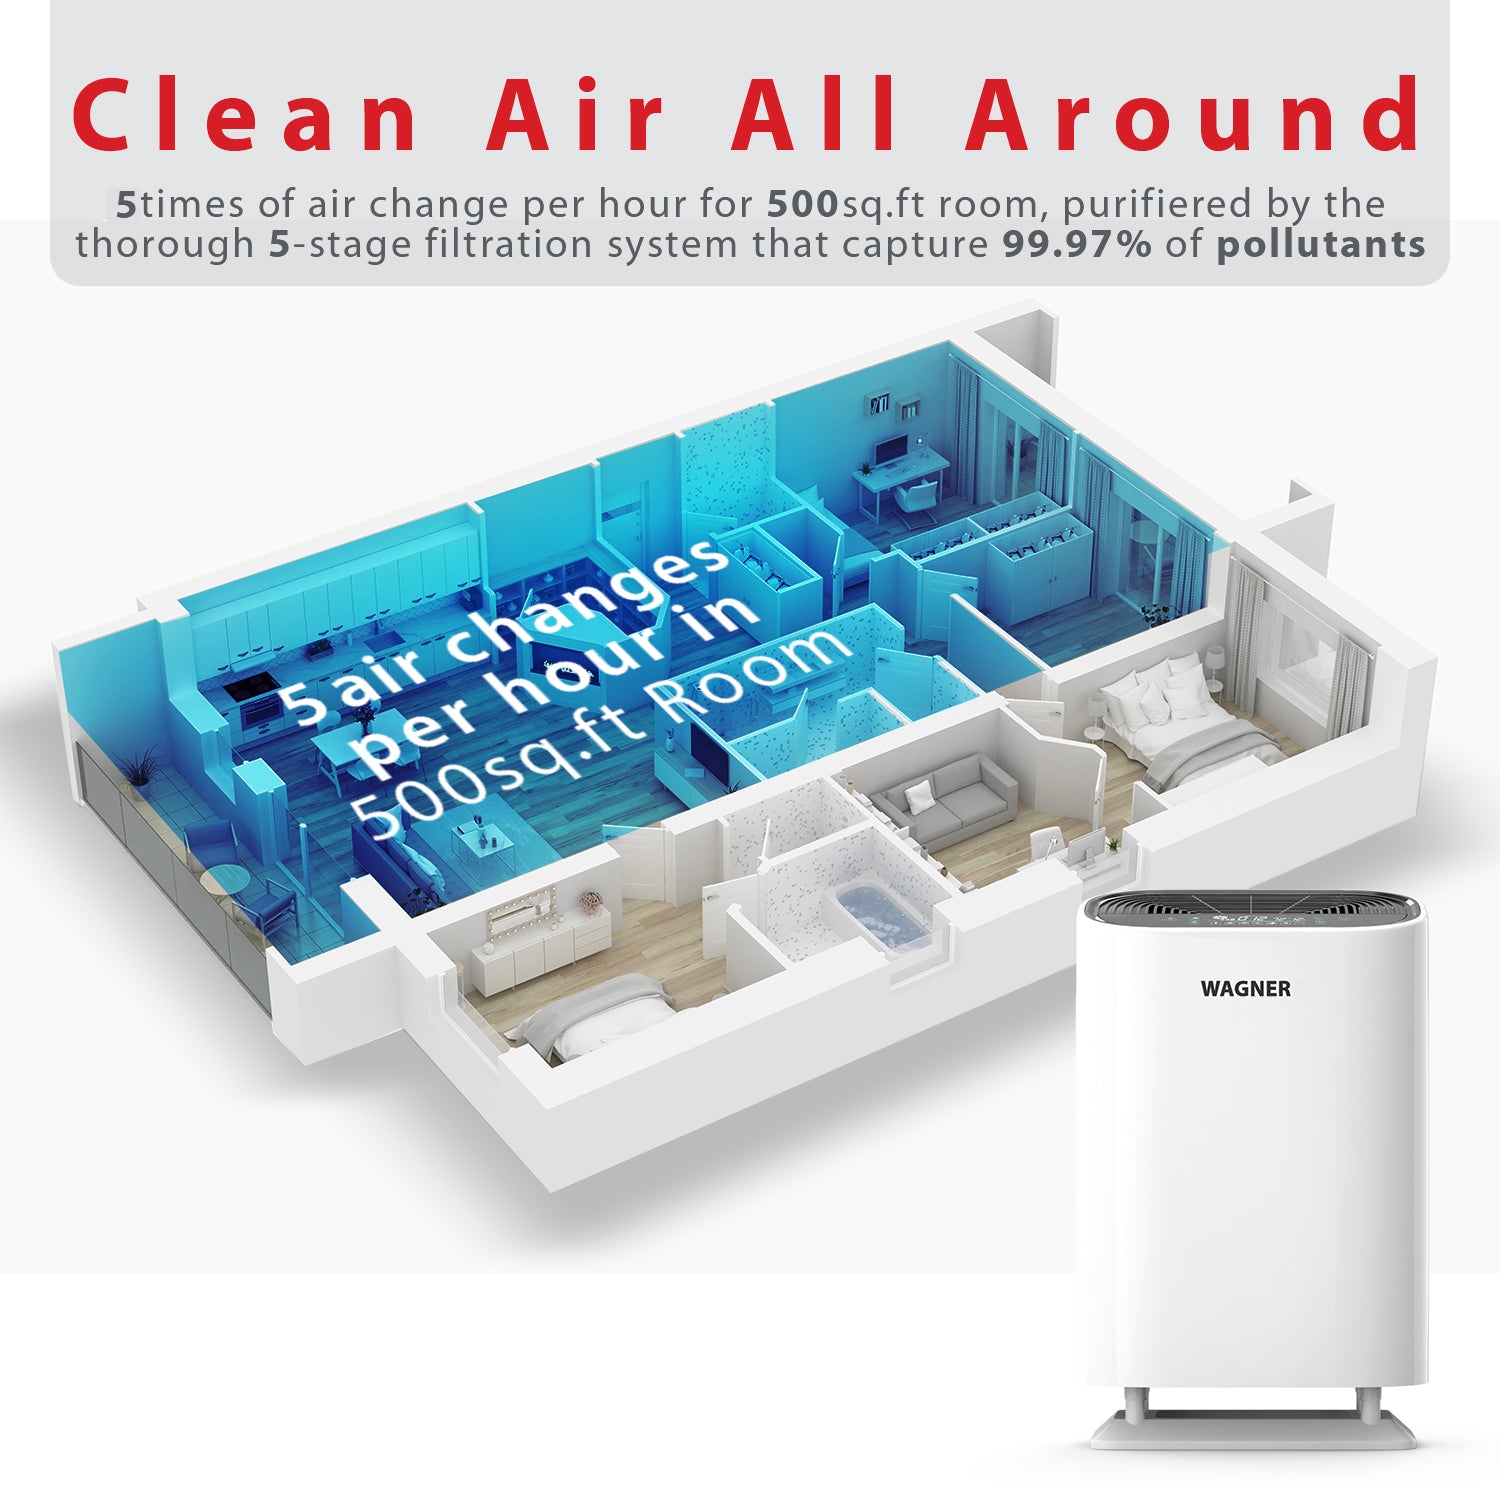 Wagner & Stern air purifier WA888 ozone free, HEPA-13 medical grade filter for large rooms. Removes air particles, dust, odors, smoke, VOC, pollen pet dander, etc. (white)